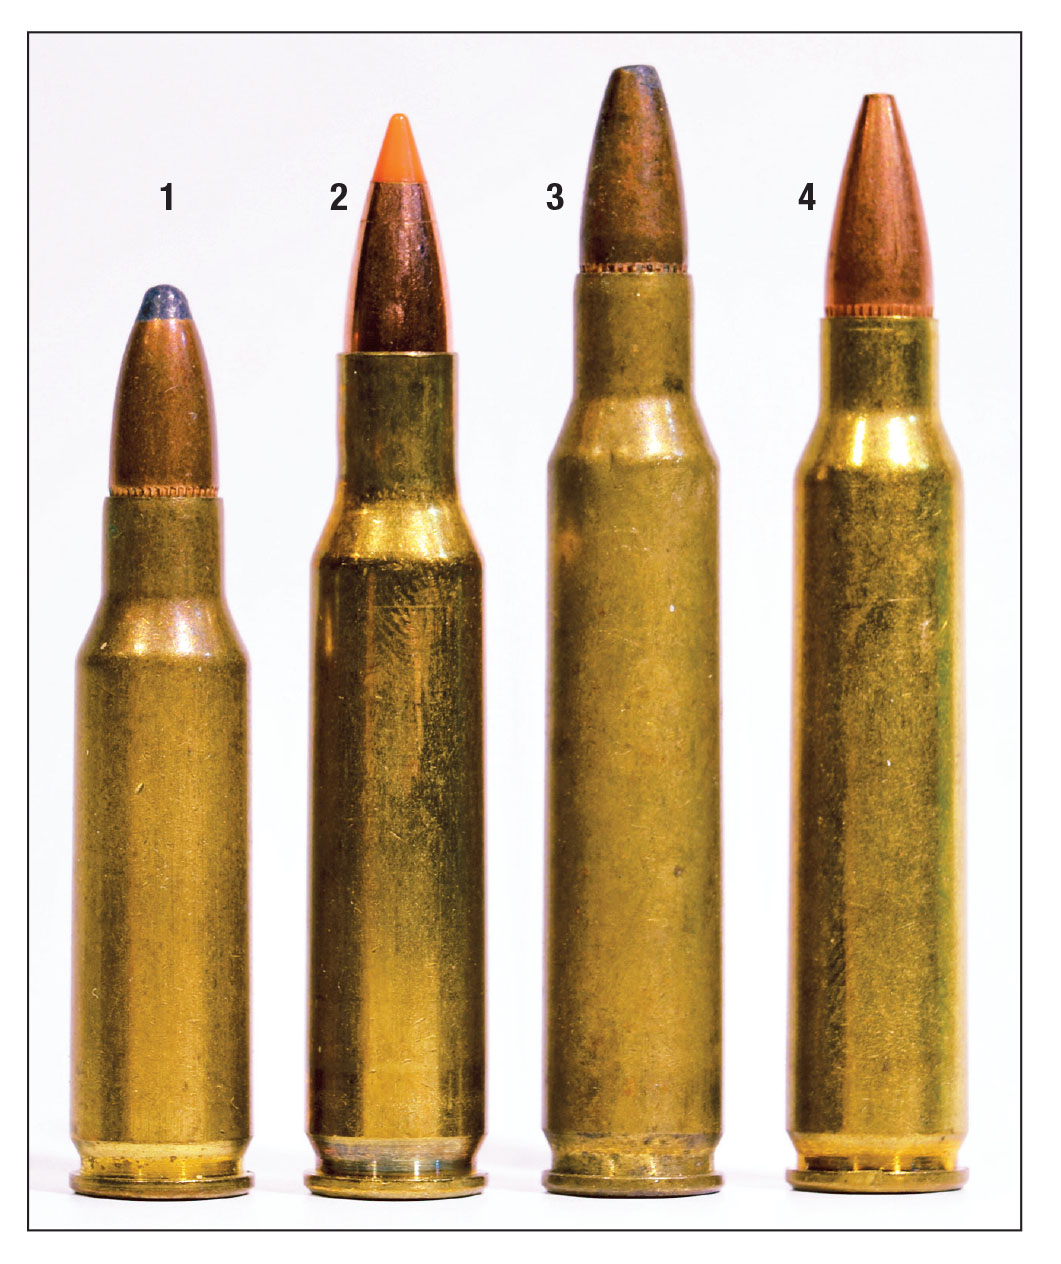 The .222 and its early progeny, from left: (1) .221 Fireball (1963), (2) .222 Remington, (3) .222 Remington Magnum (1958), (4) .223 Remington (early 1960s).